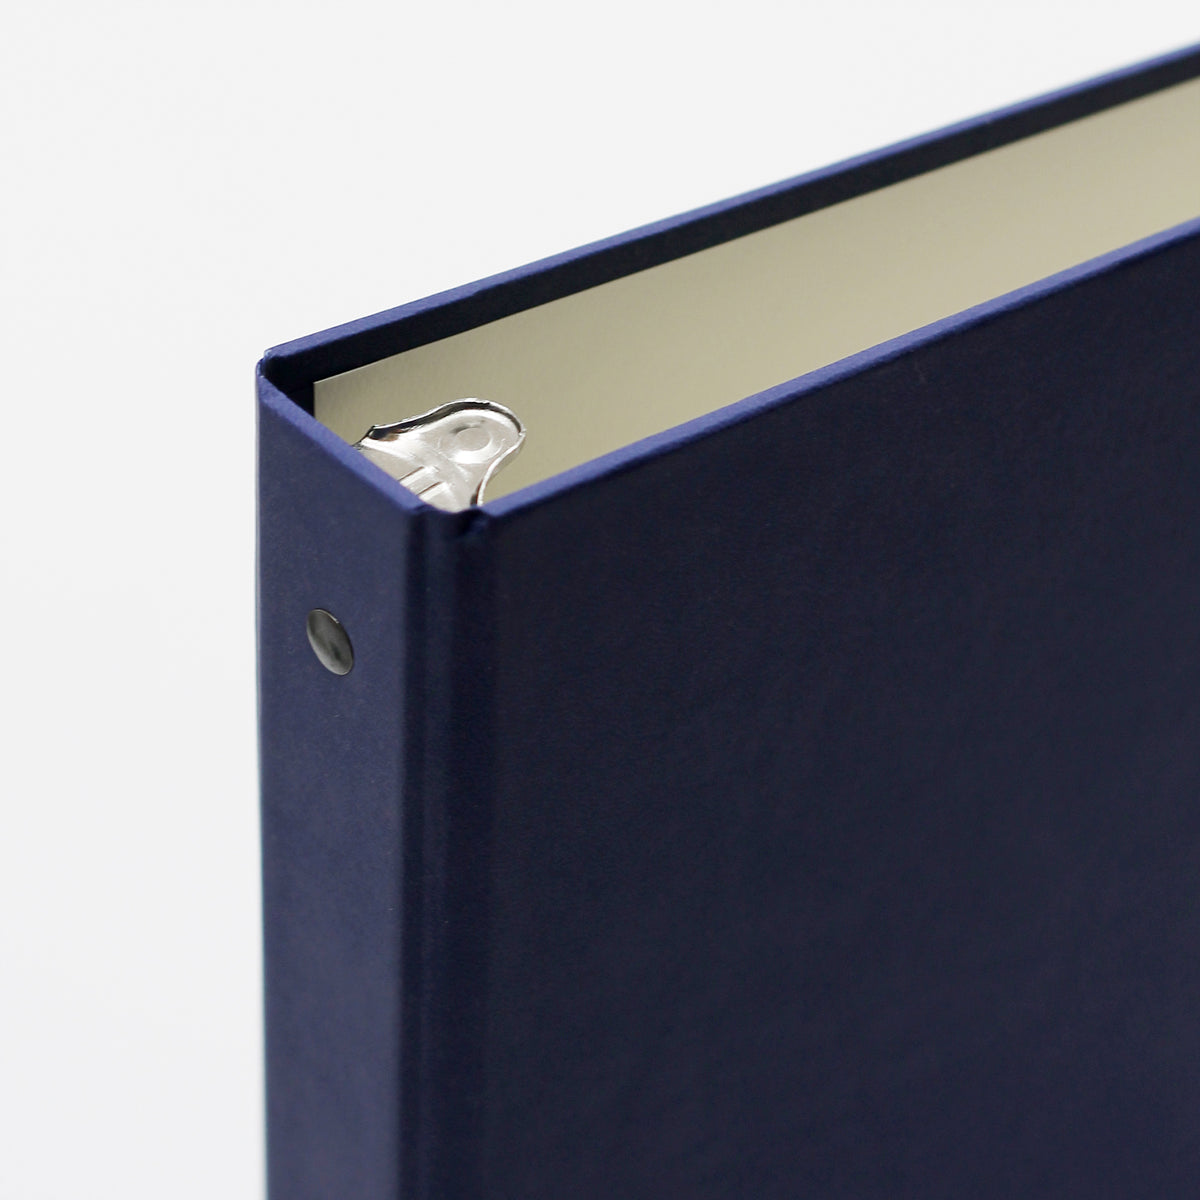 Storage Binder for Photos or Documents with Indigo Vegan Leather Cover